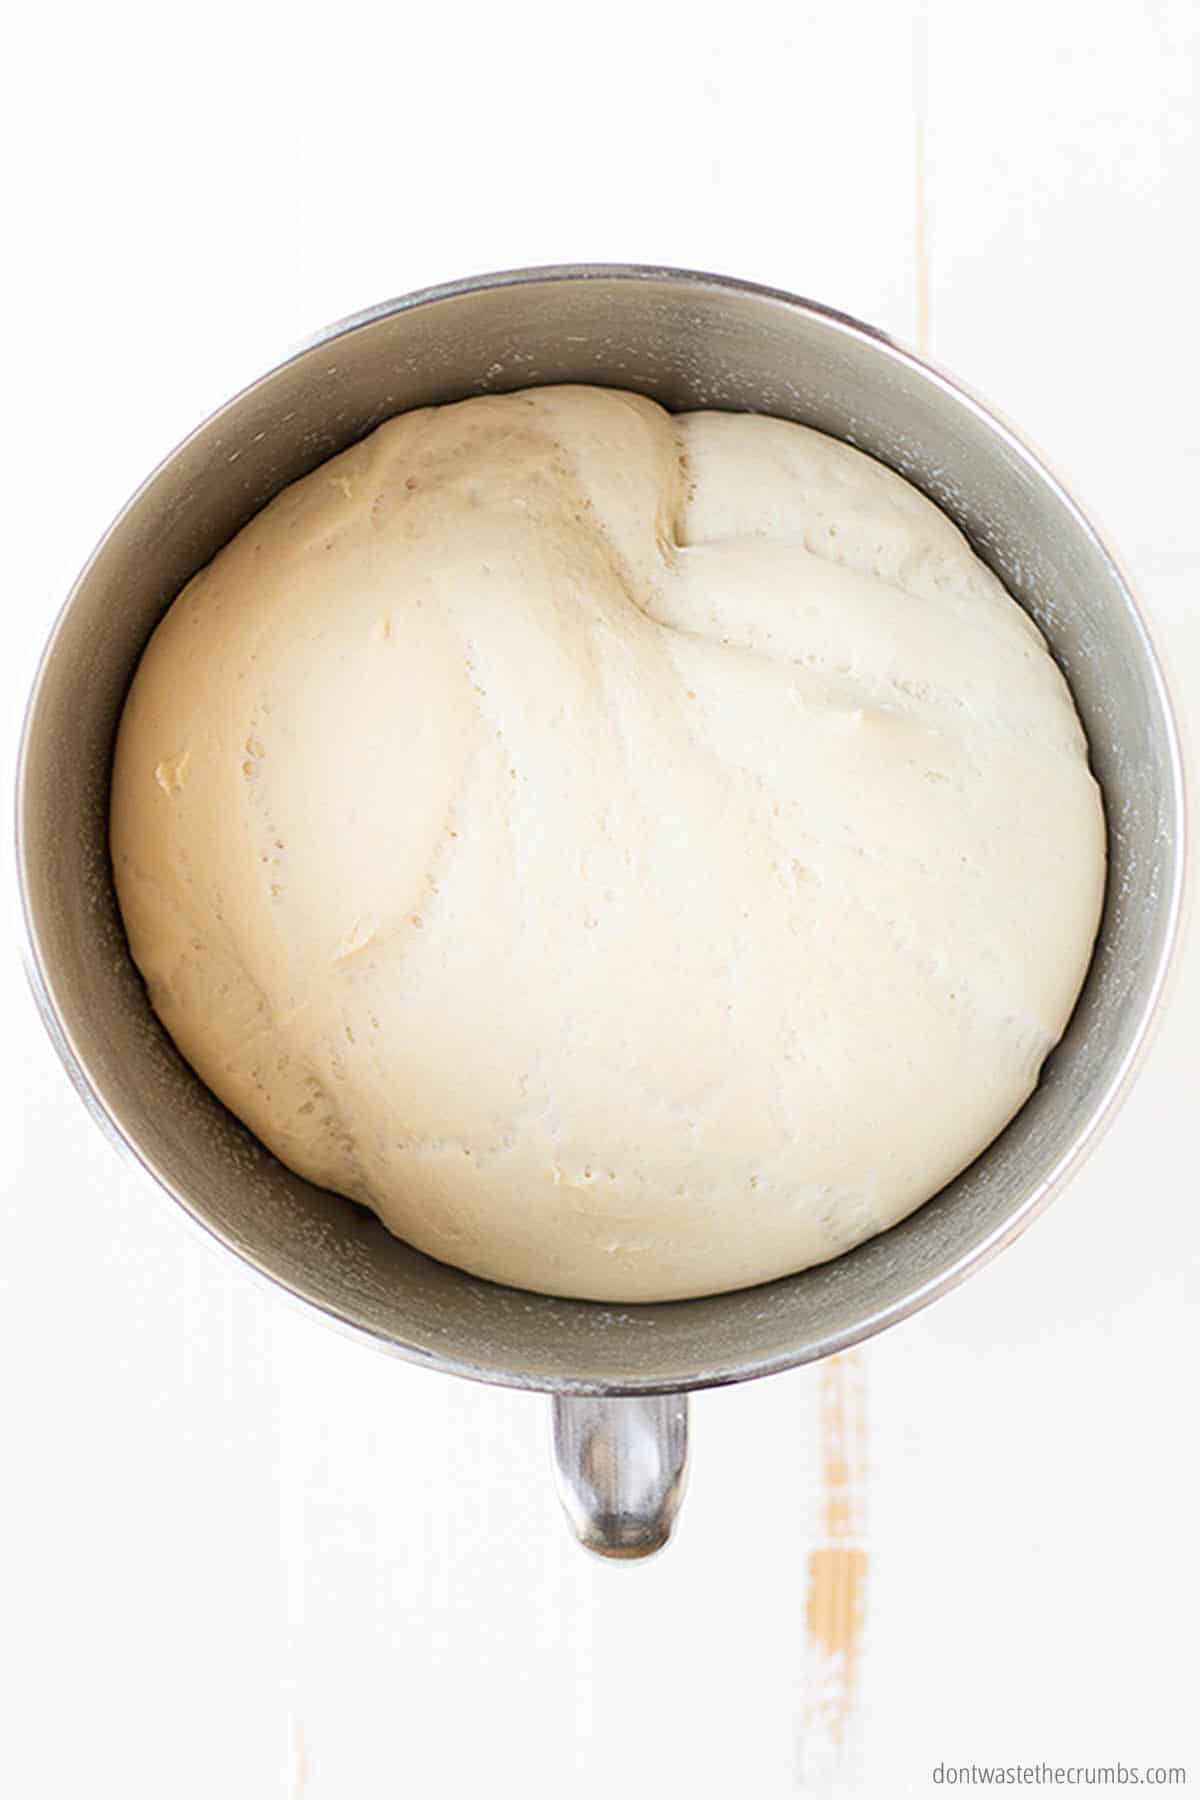 A metal mixing bowl is filled with risen bread dough ready for the oven or freezer.